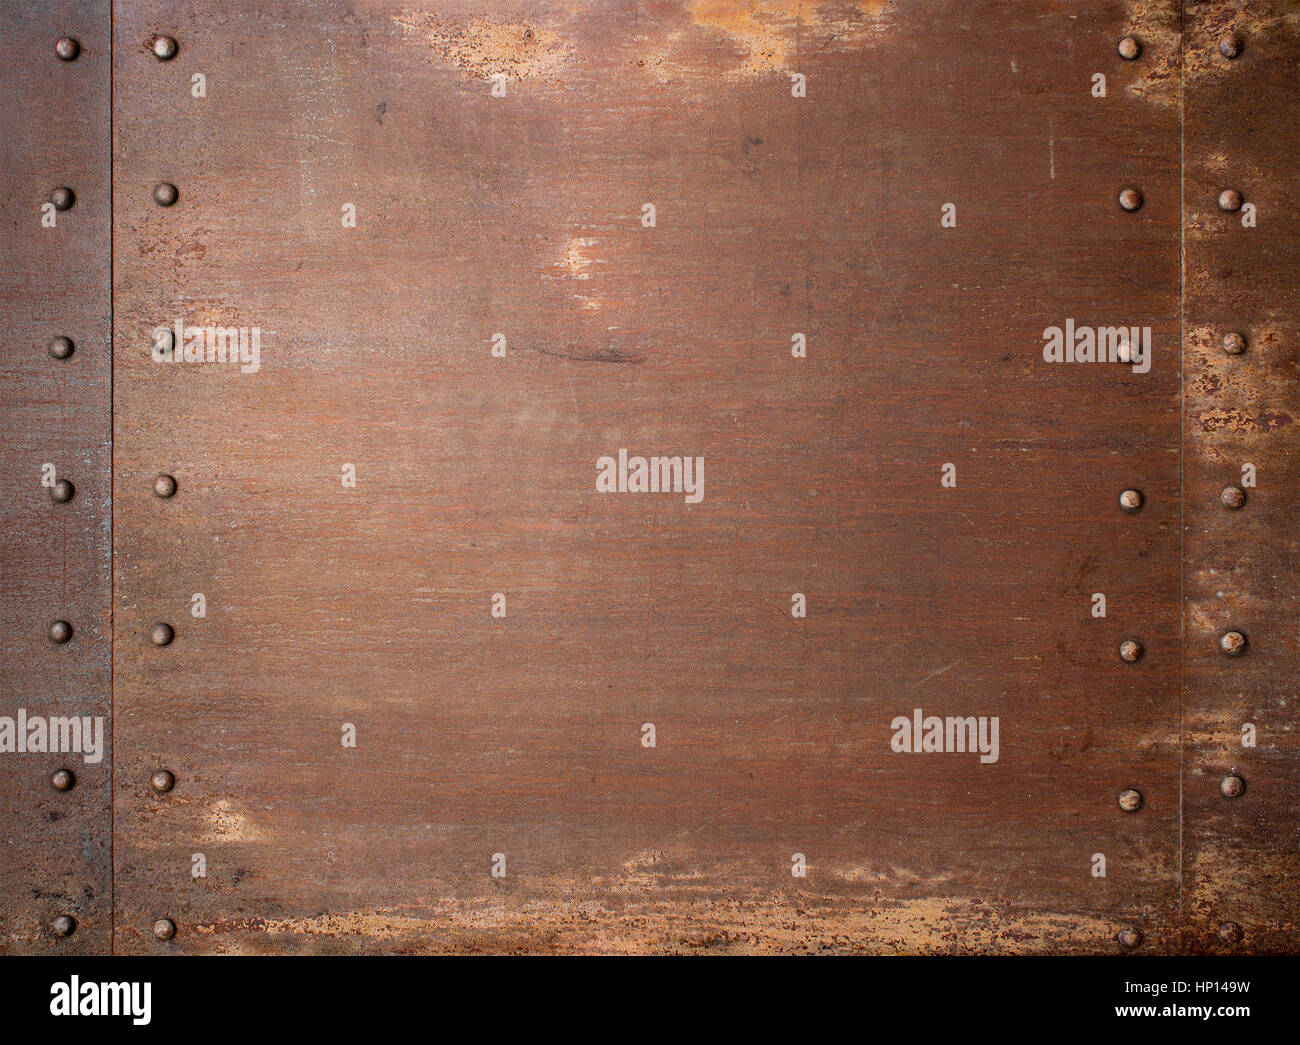 Rusty metal steam punk background or texture with rivets Stock Photo